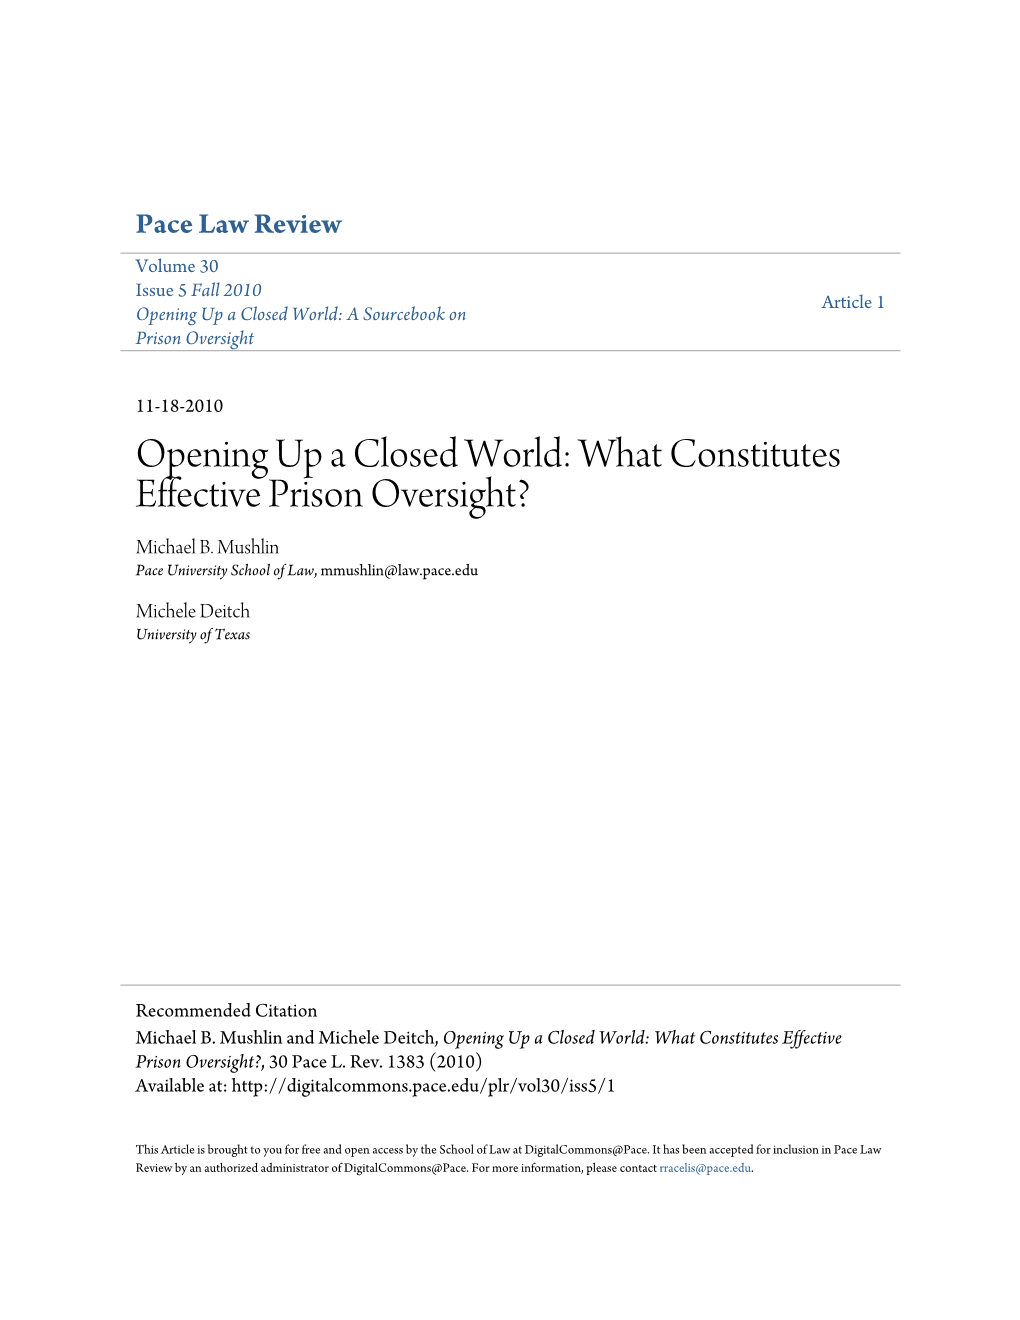 Opening up a Closed World: What Constitutes Effective Prison Oversight? Michael B